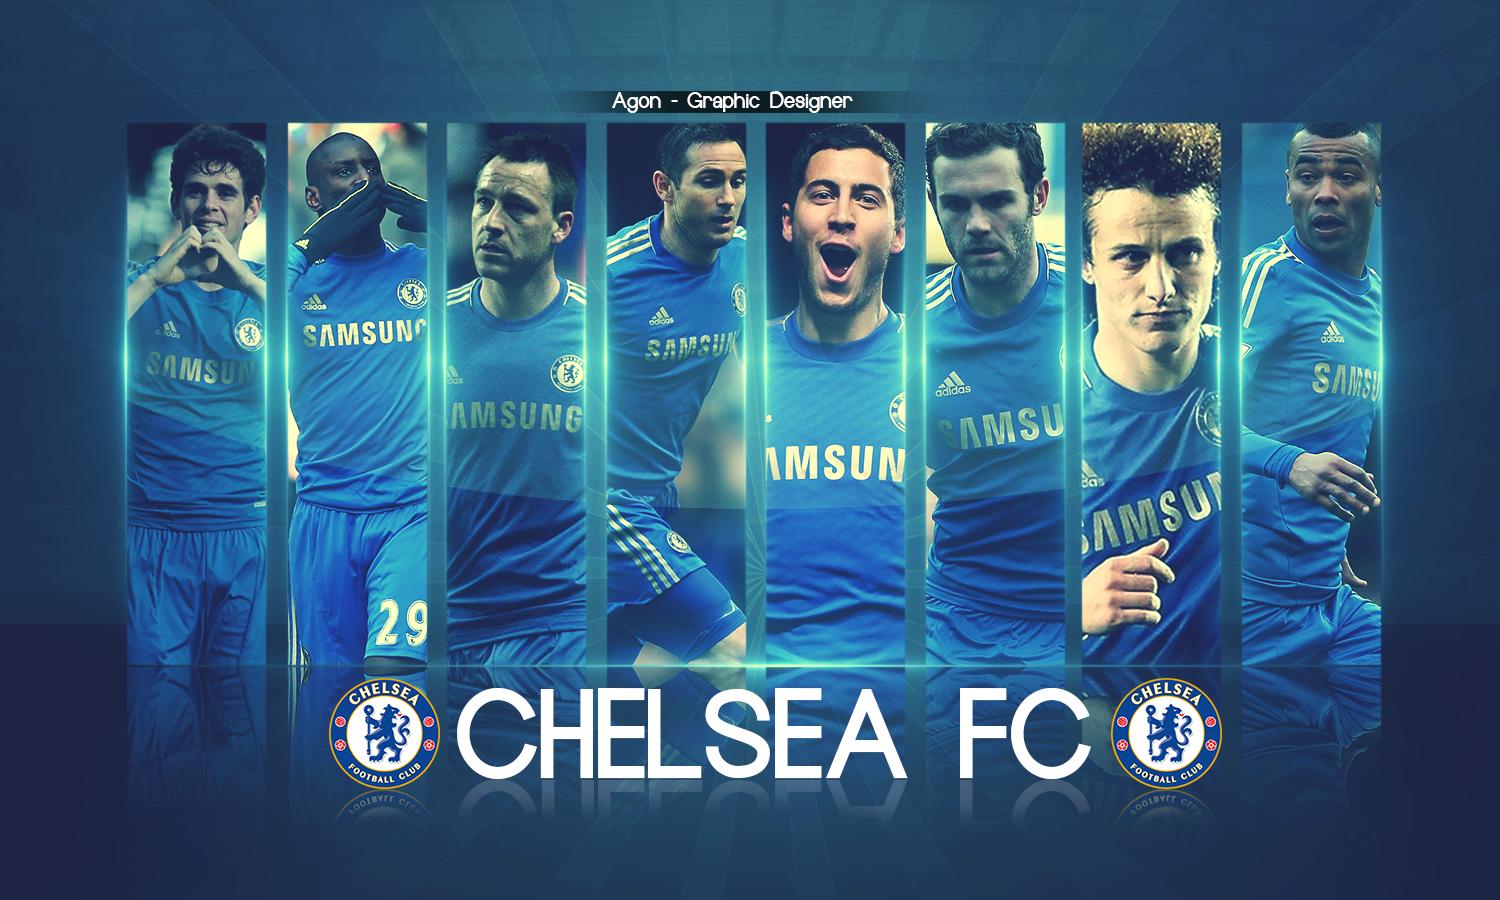 Free Download Chelsea Fc Wallpapers Hd 2015 1500x900 For Your Desktop Mobile Tablet Explore 49 Chelsea Fc Wallpaper 2015 Chelsea Fc Logo Wallpaper Chelsea Fc Wallpapers Chelsea Wallpapers 2015